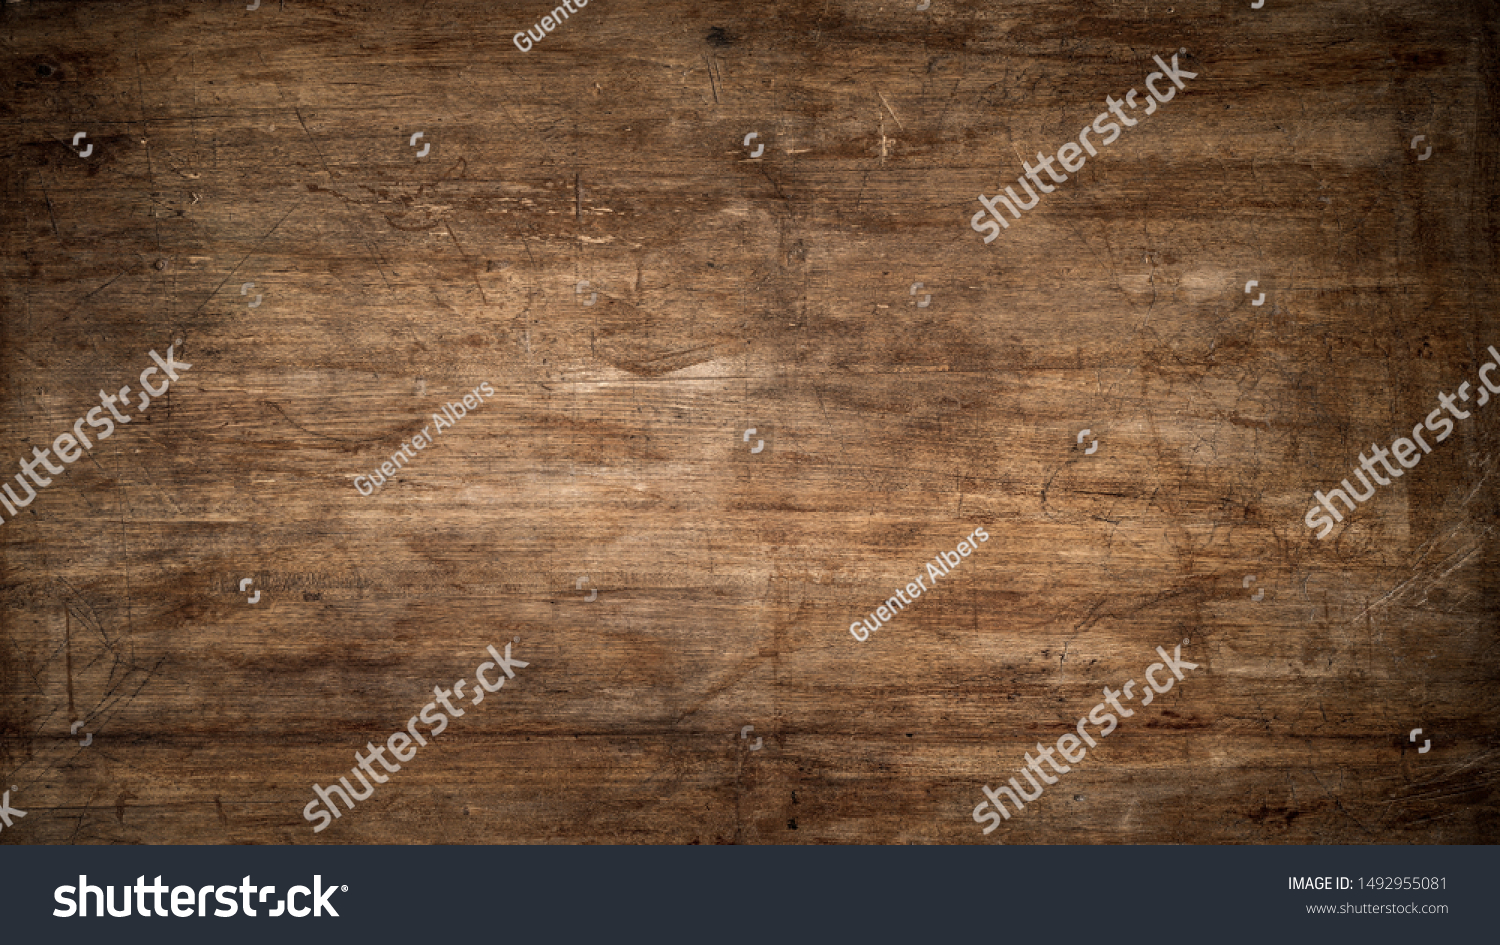 Dark Brown Wood Texture with Scratches as Background #1492955081